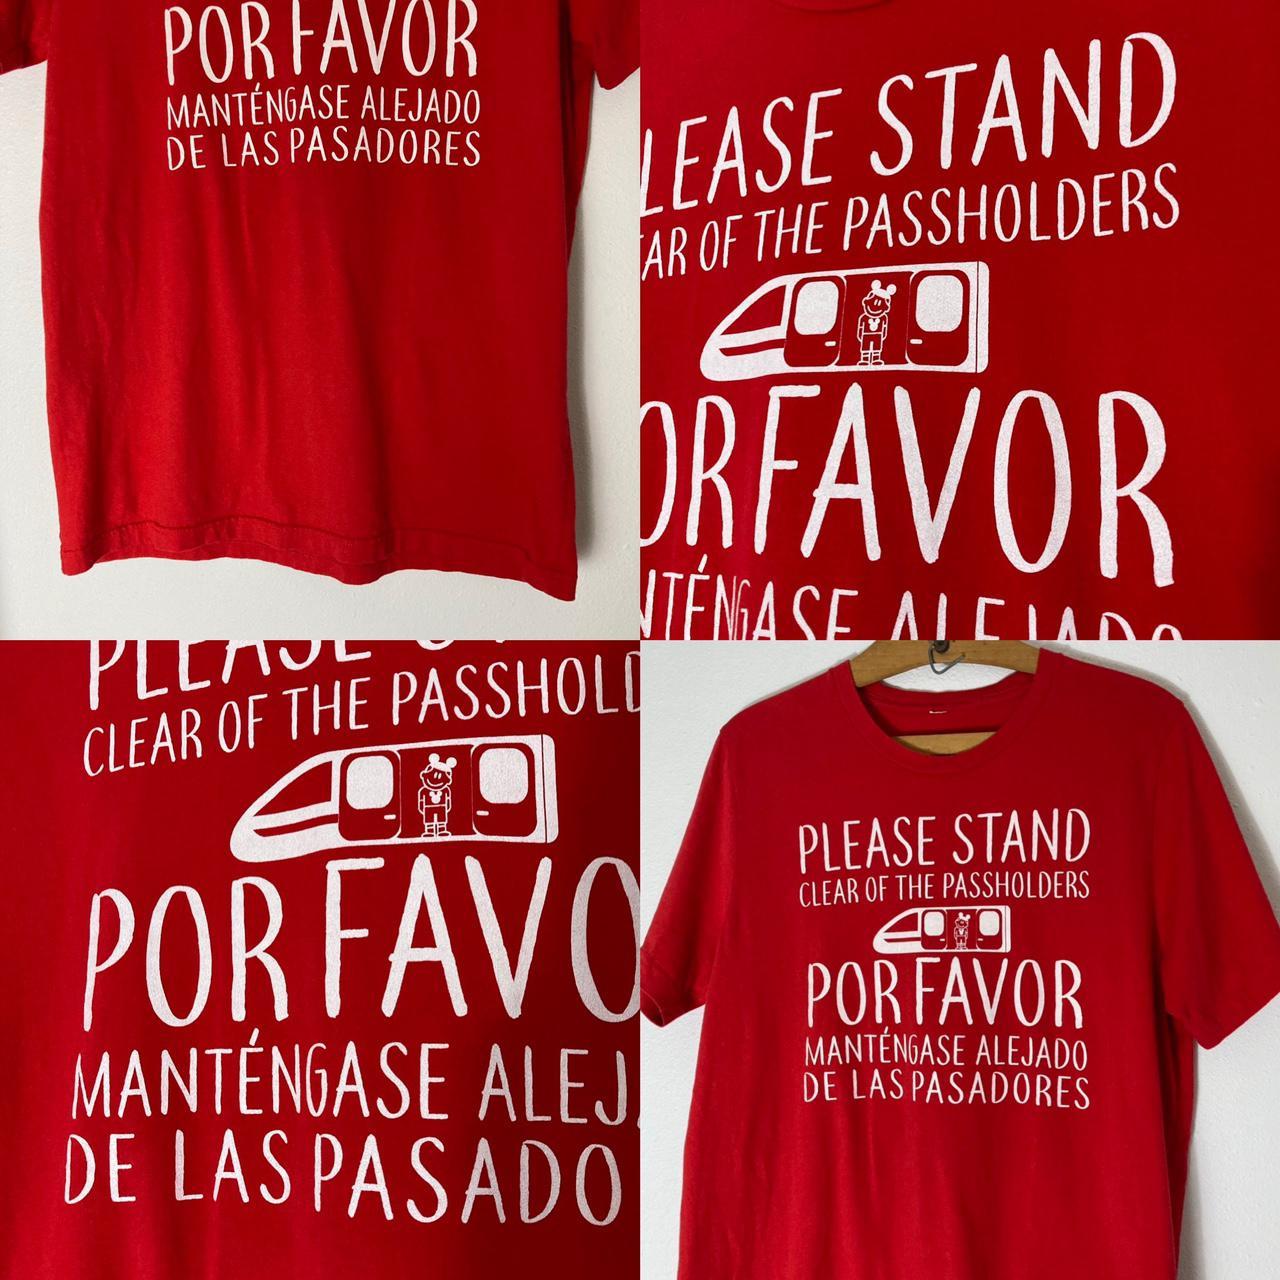 Product Image 2 - Red passholder Disney Monorail tee

The